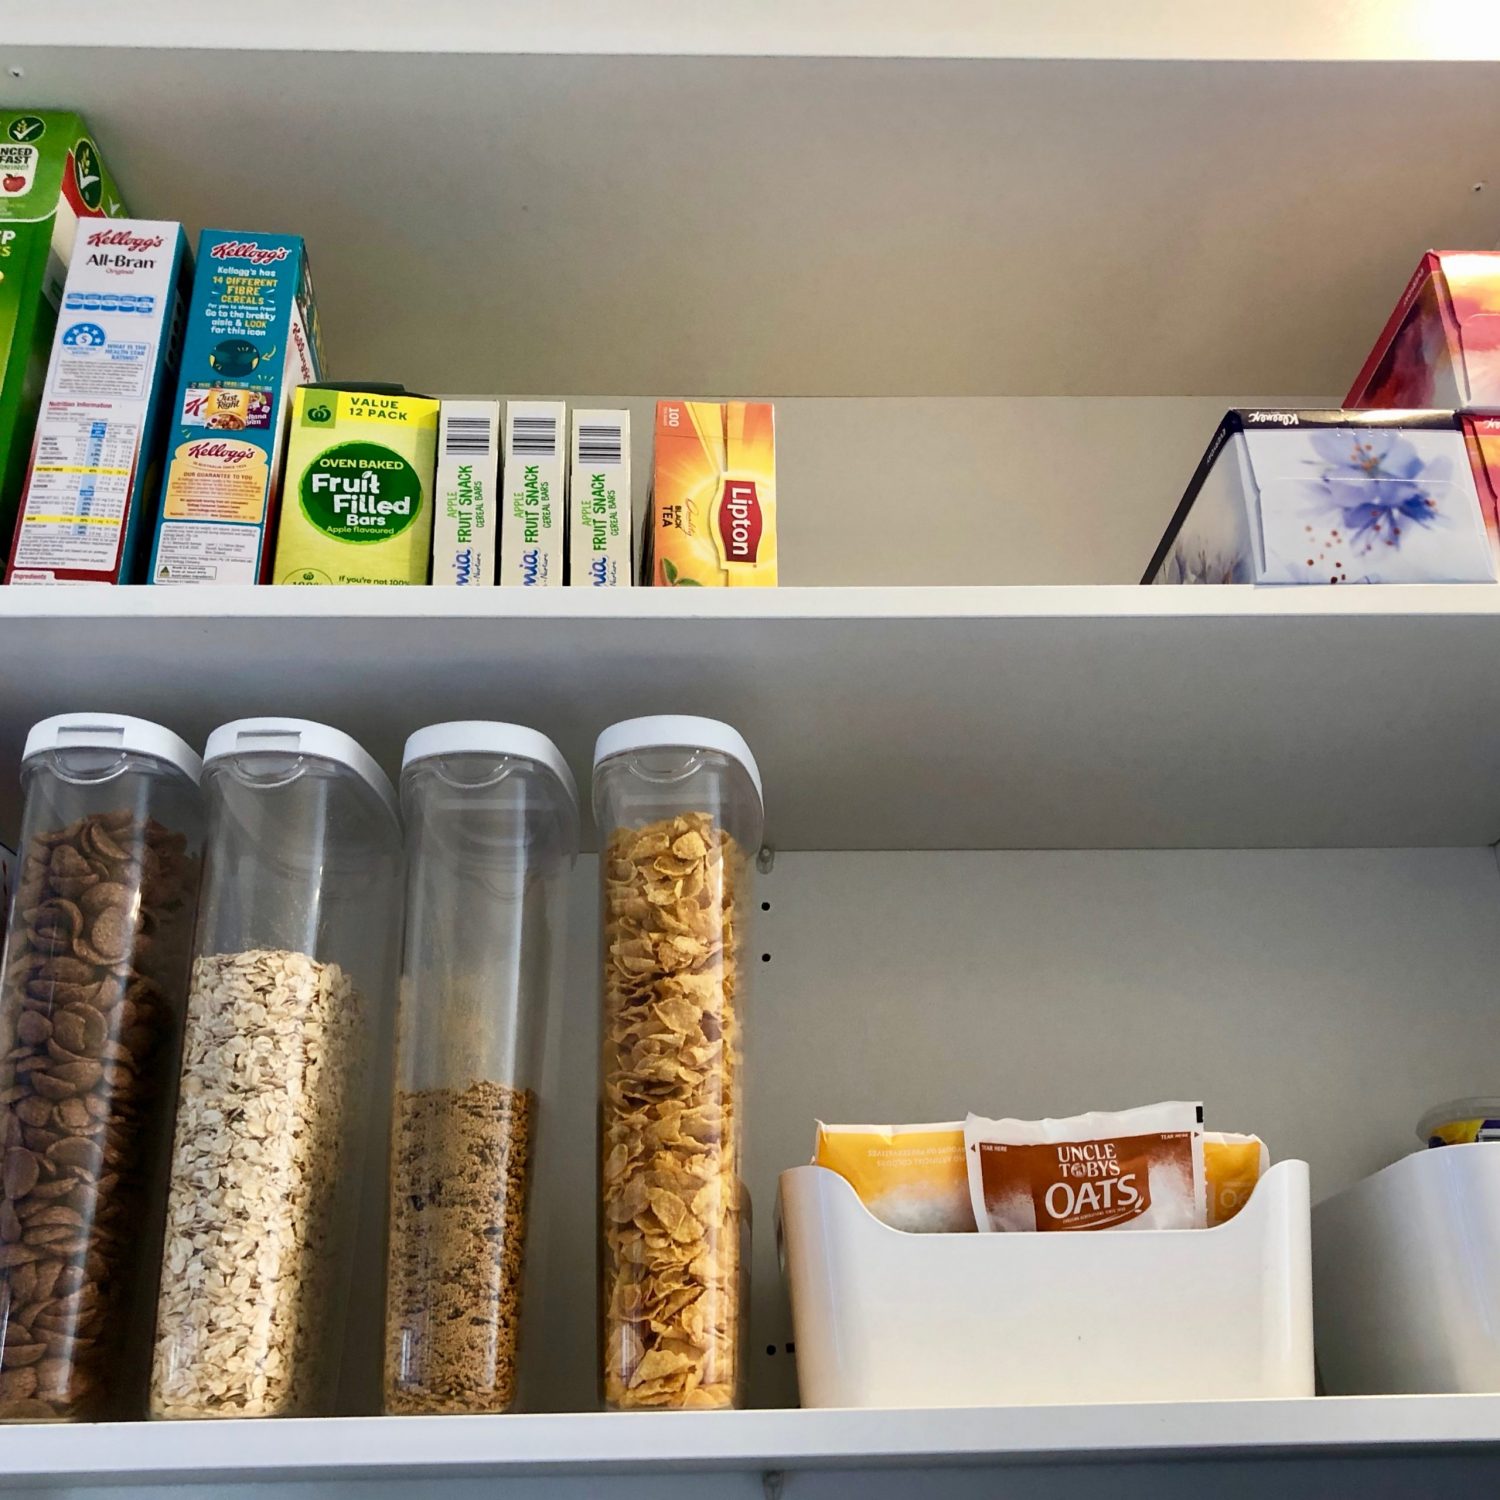 Cereal in pantry organisation - The Organising Bee